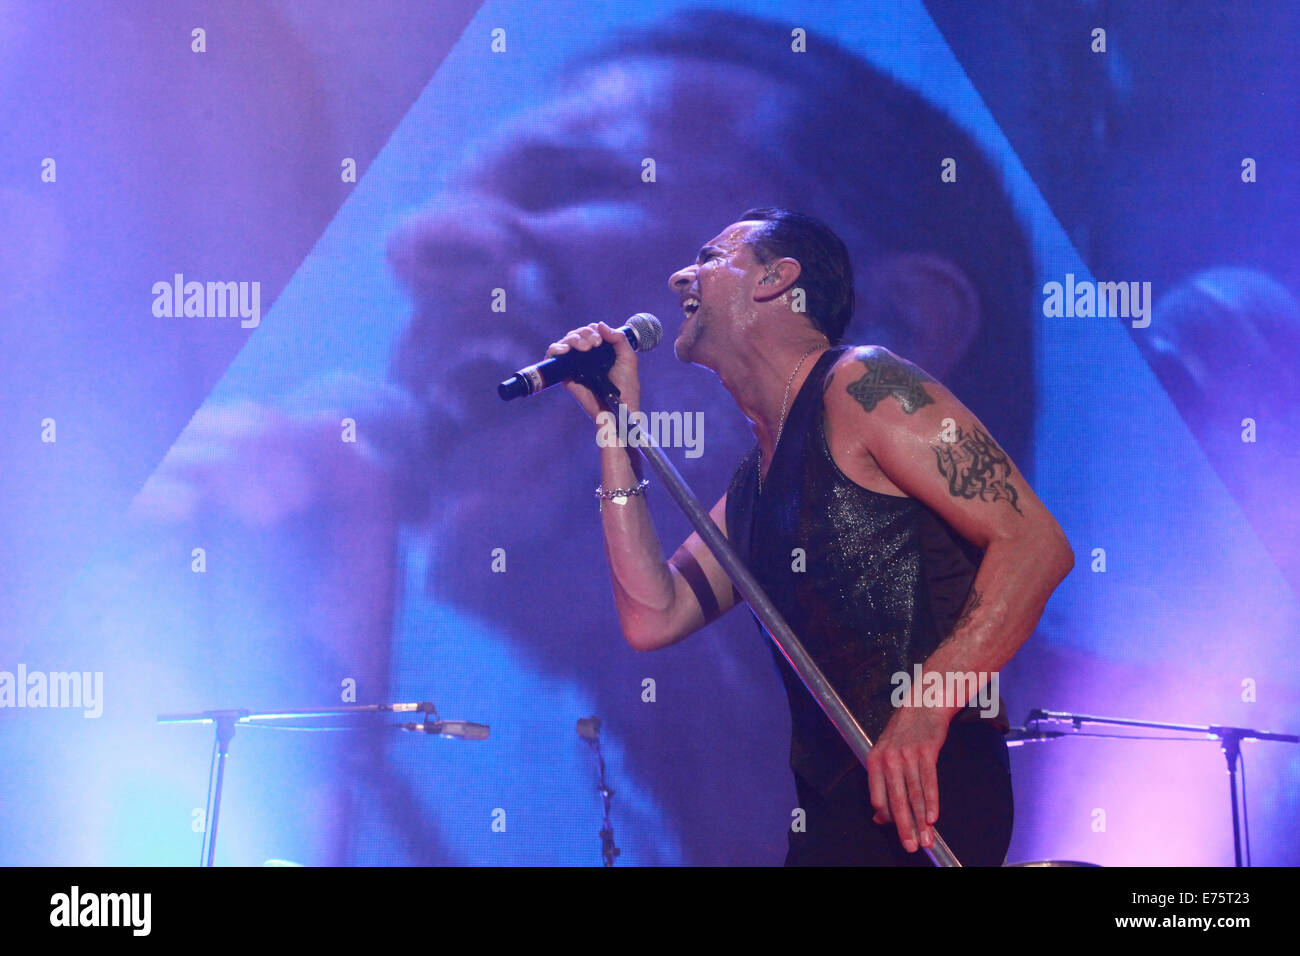 Singer Dave Gahan during a live performance with his band Depeche Mode in the Messe Dresden congress hall, Dresden, Saxony Stock Photo